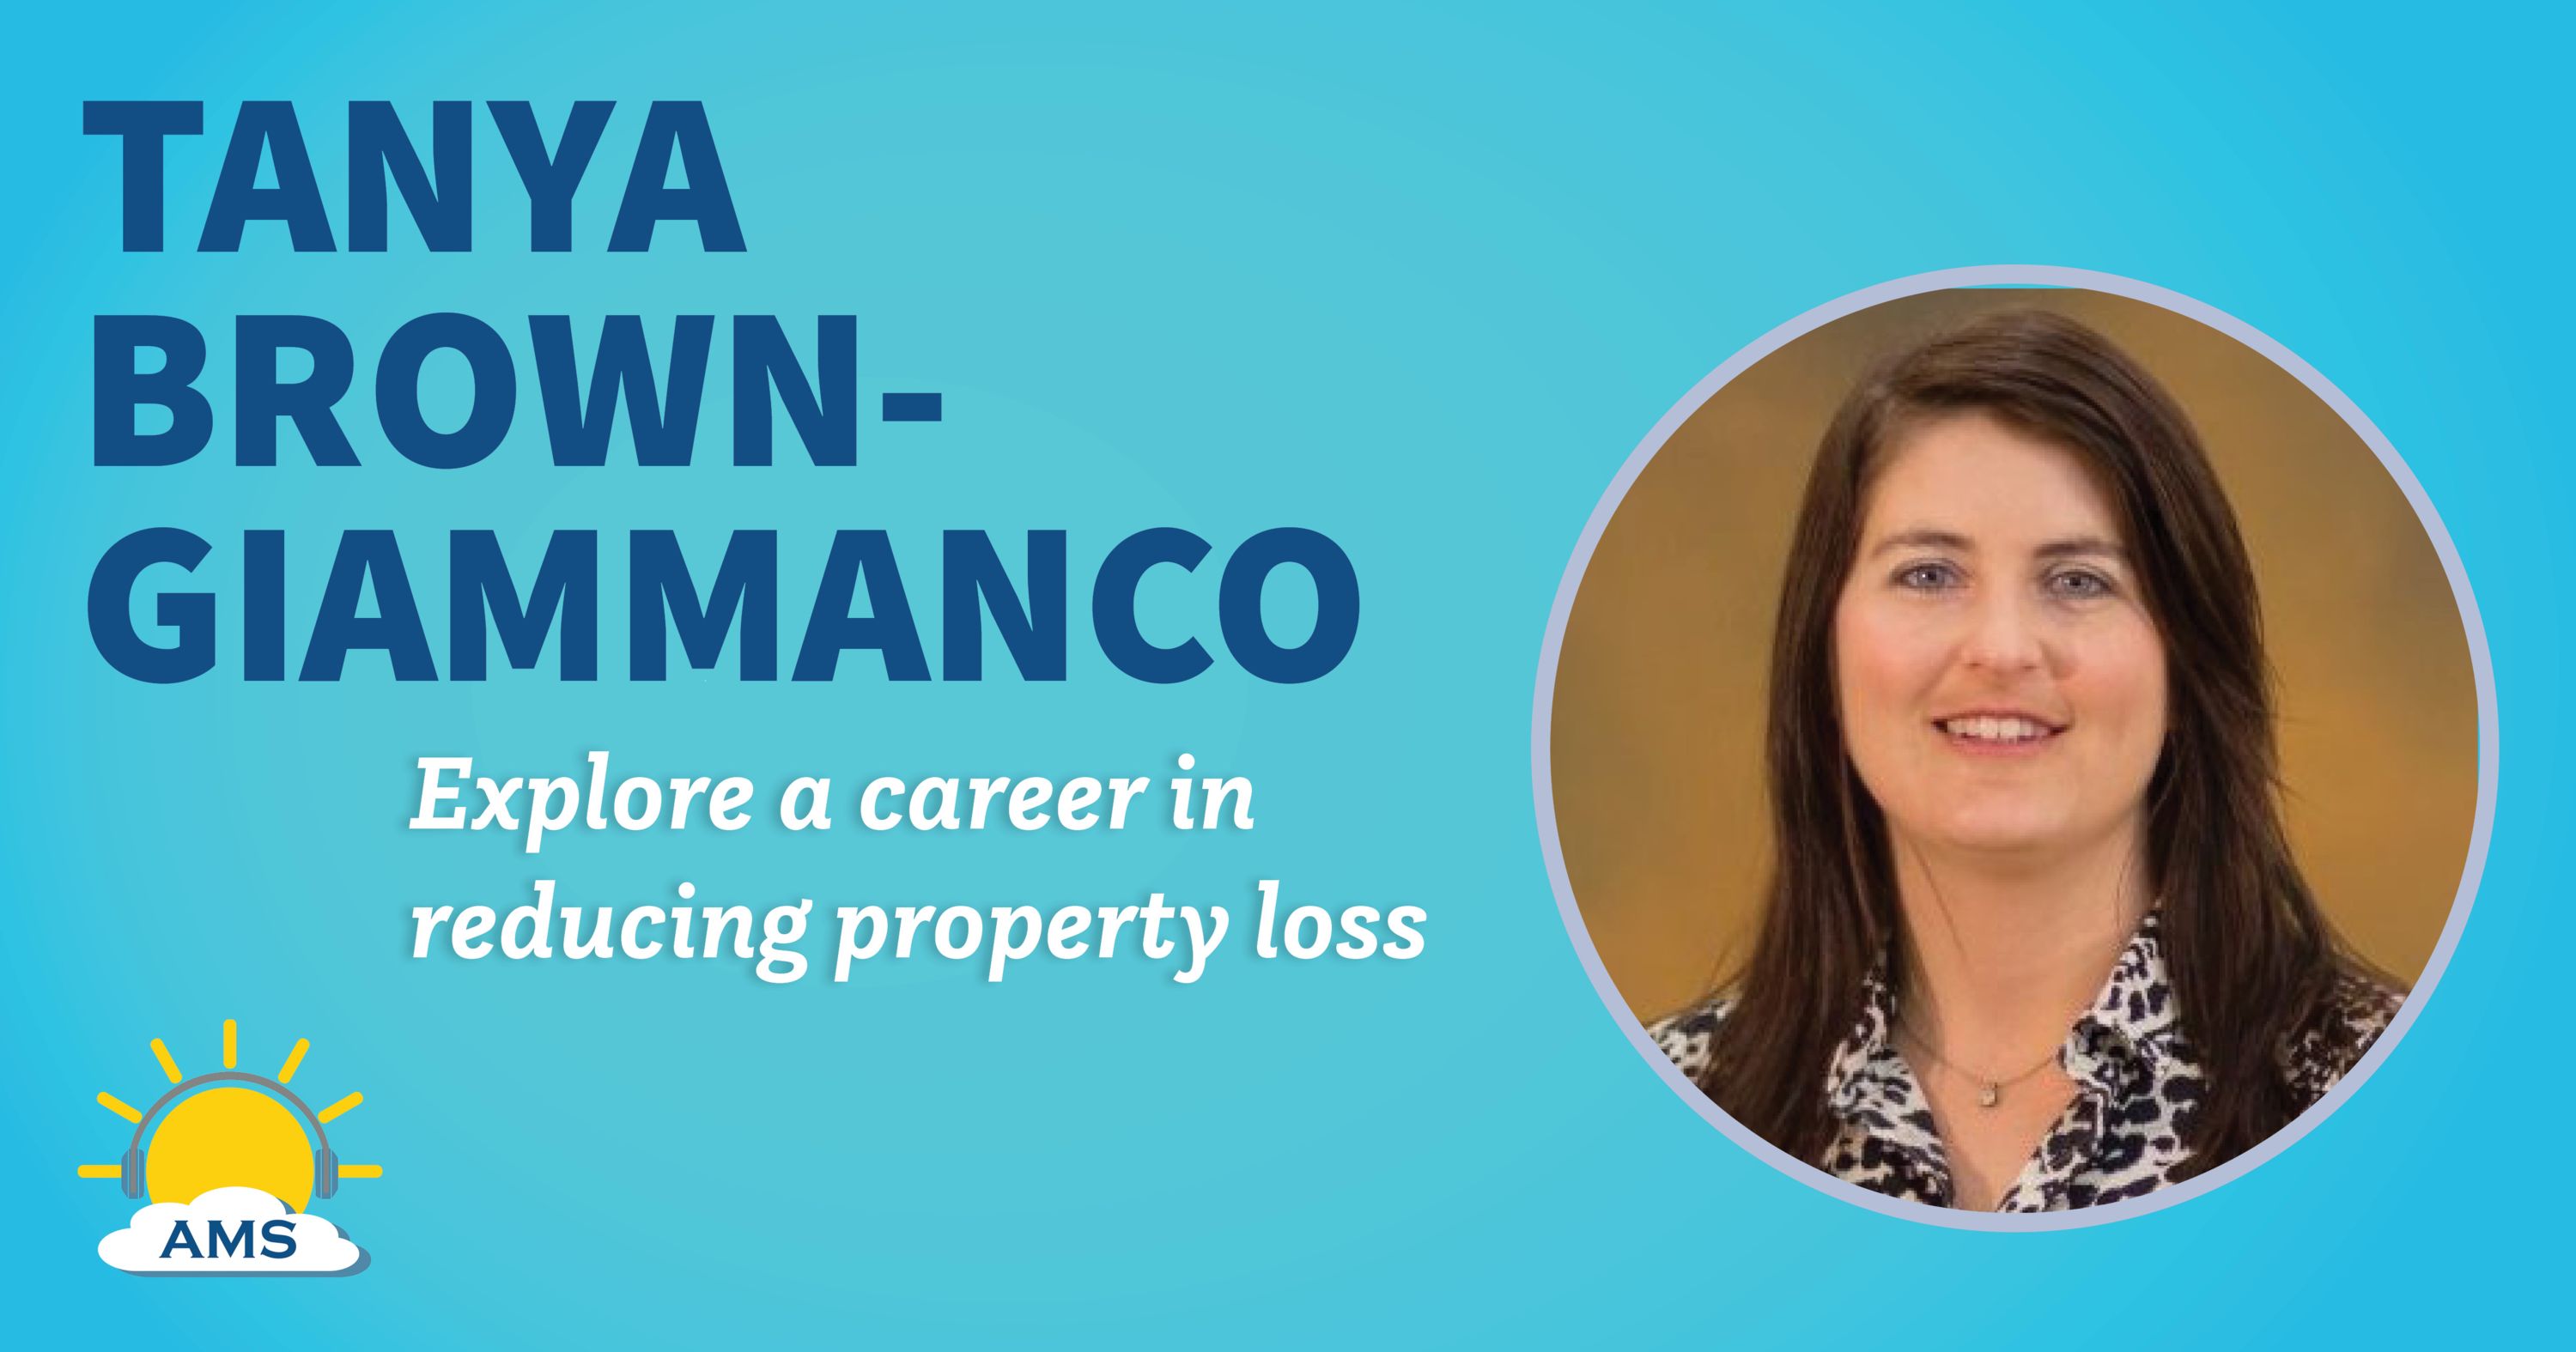 tanya brown-giammanco headshot graphic with teaser that that reads &quotexplore a career in reducing property loss"